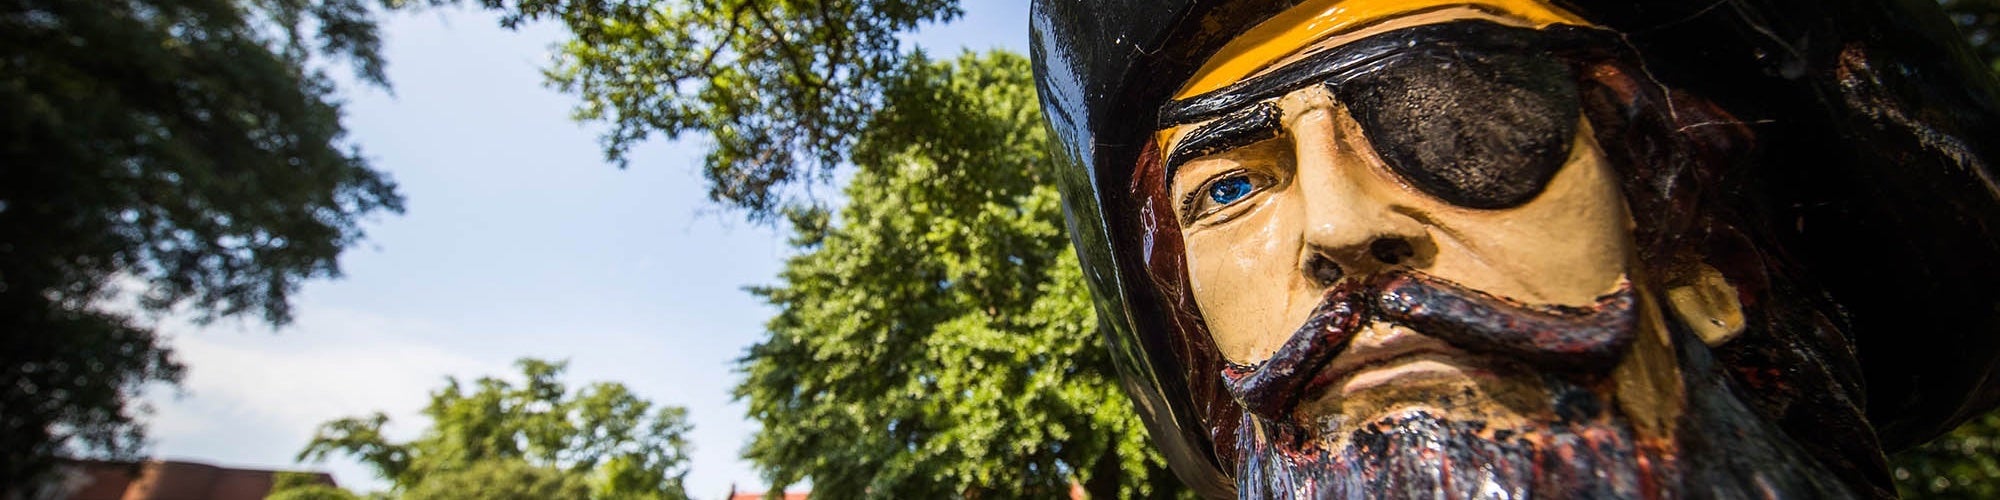 Photo of Closeup of Pirate Statue on Campus